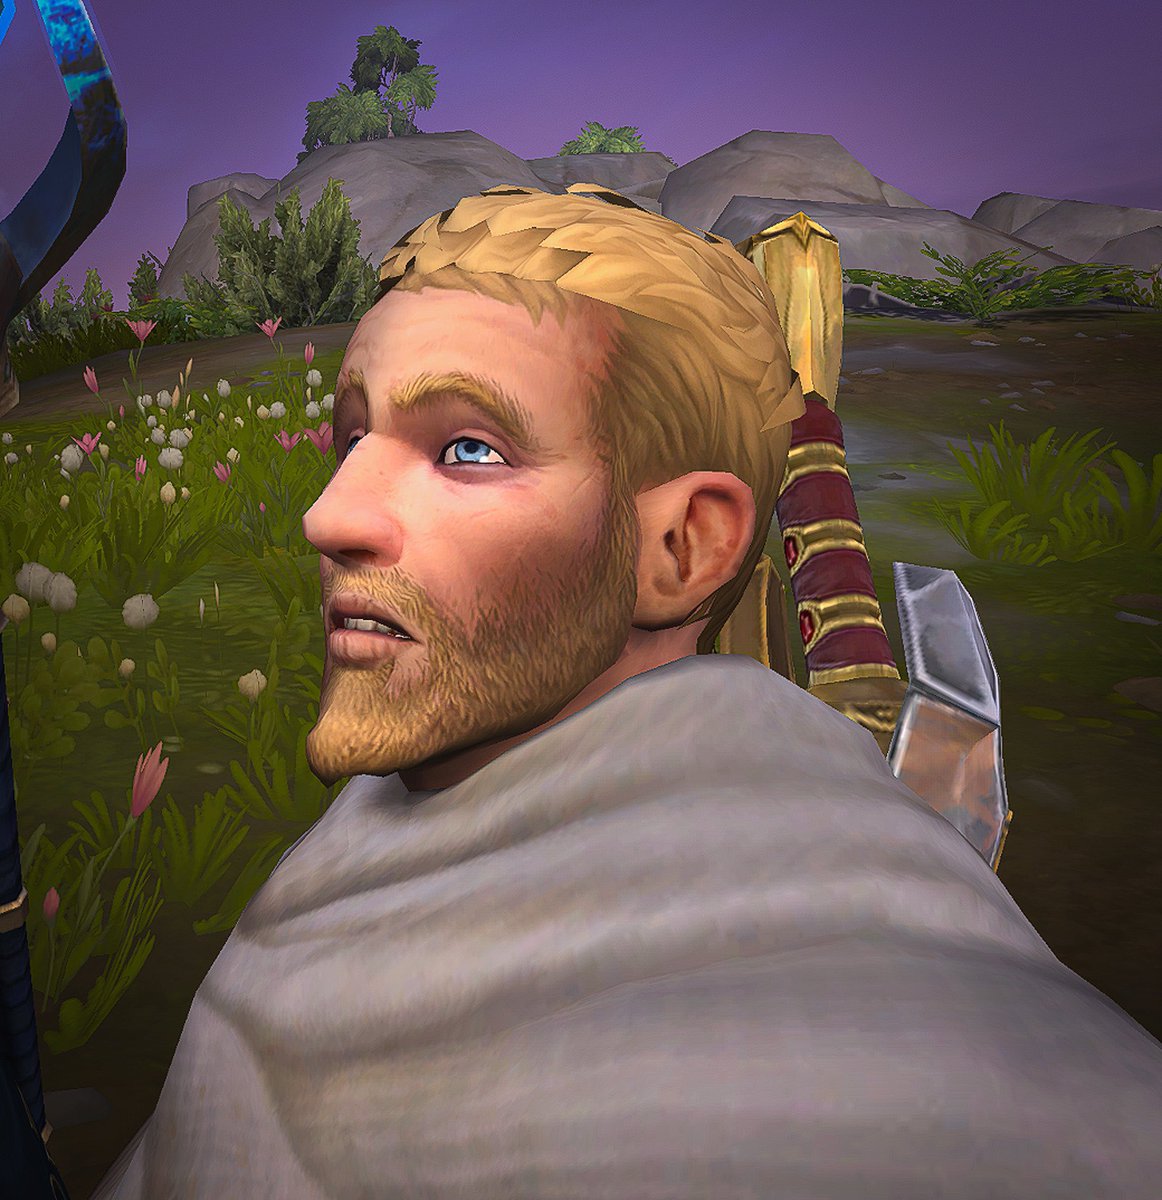 Anduin’s 20s have hit him HARD (same though)